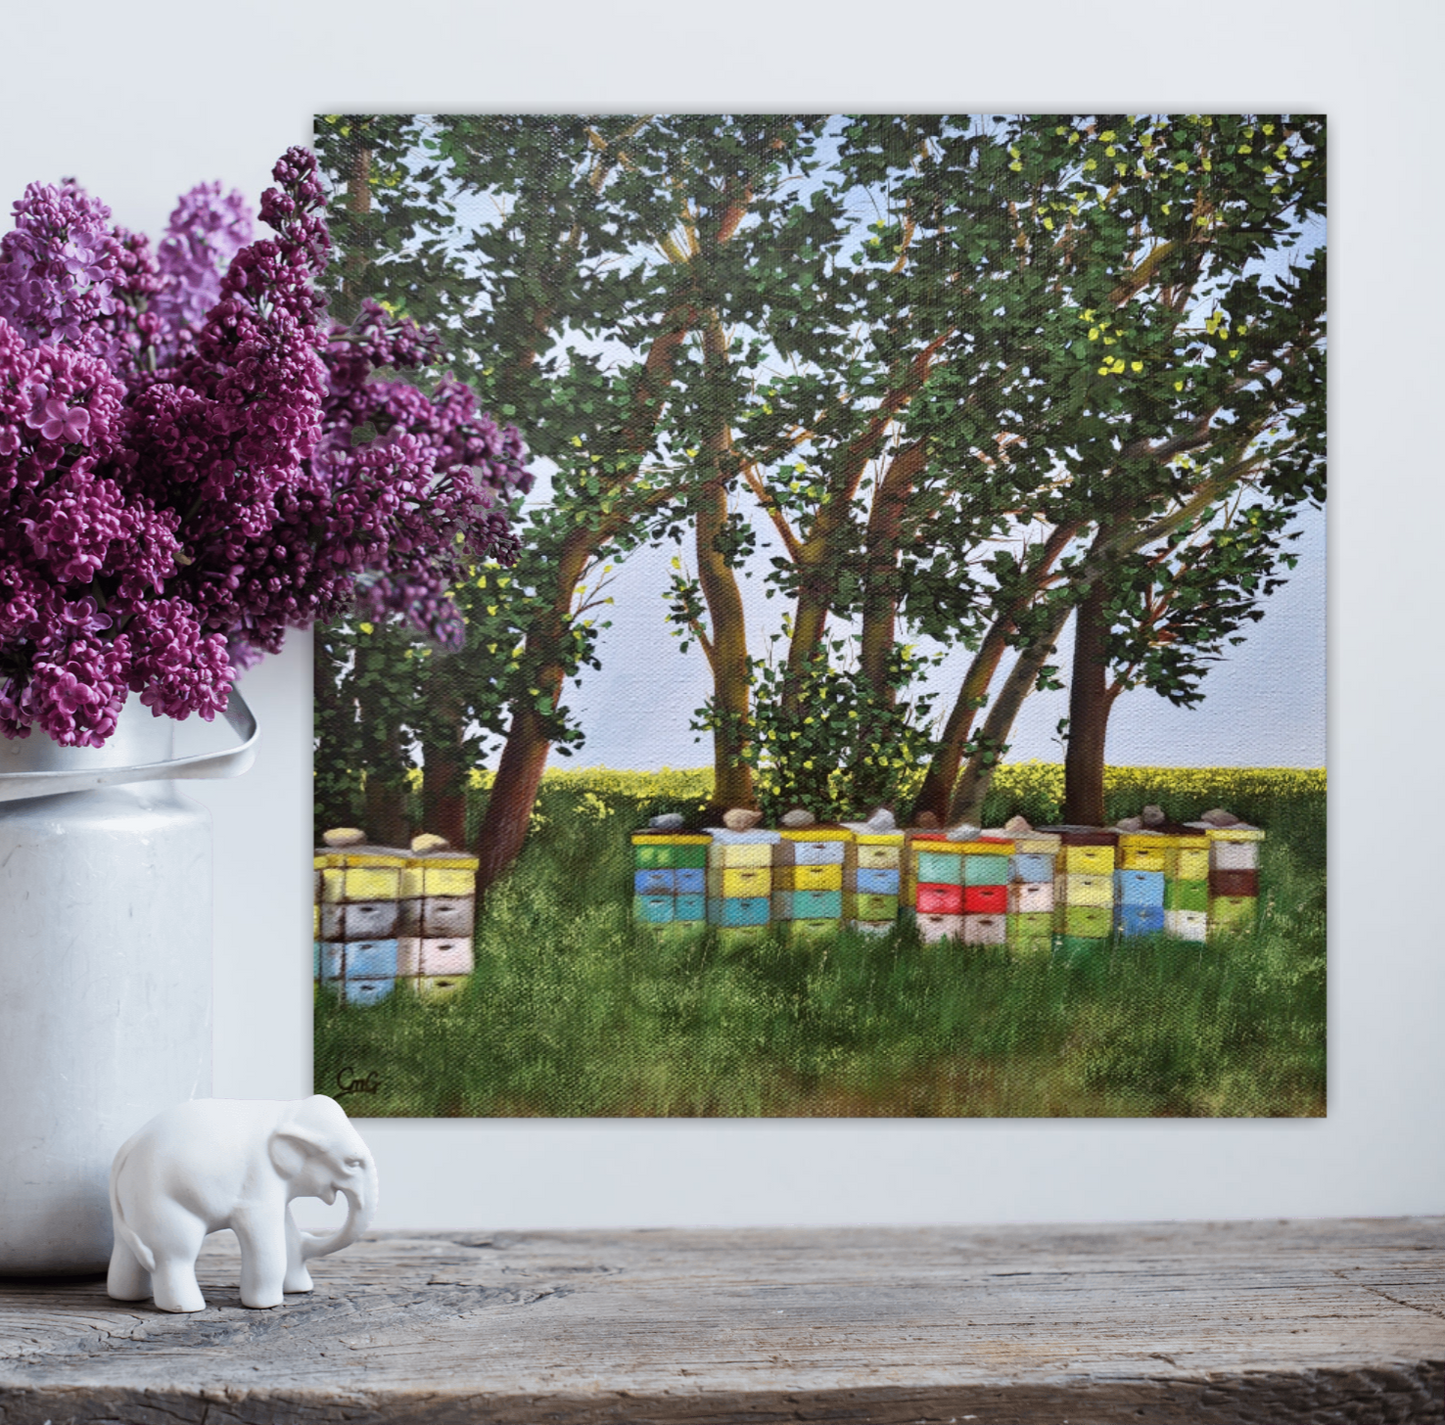 Life is Sweet - an original landscape painting of bee boxes under swaying willows in an open field By Christina Gouldsborough - painting on wall behind flowers